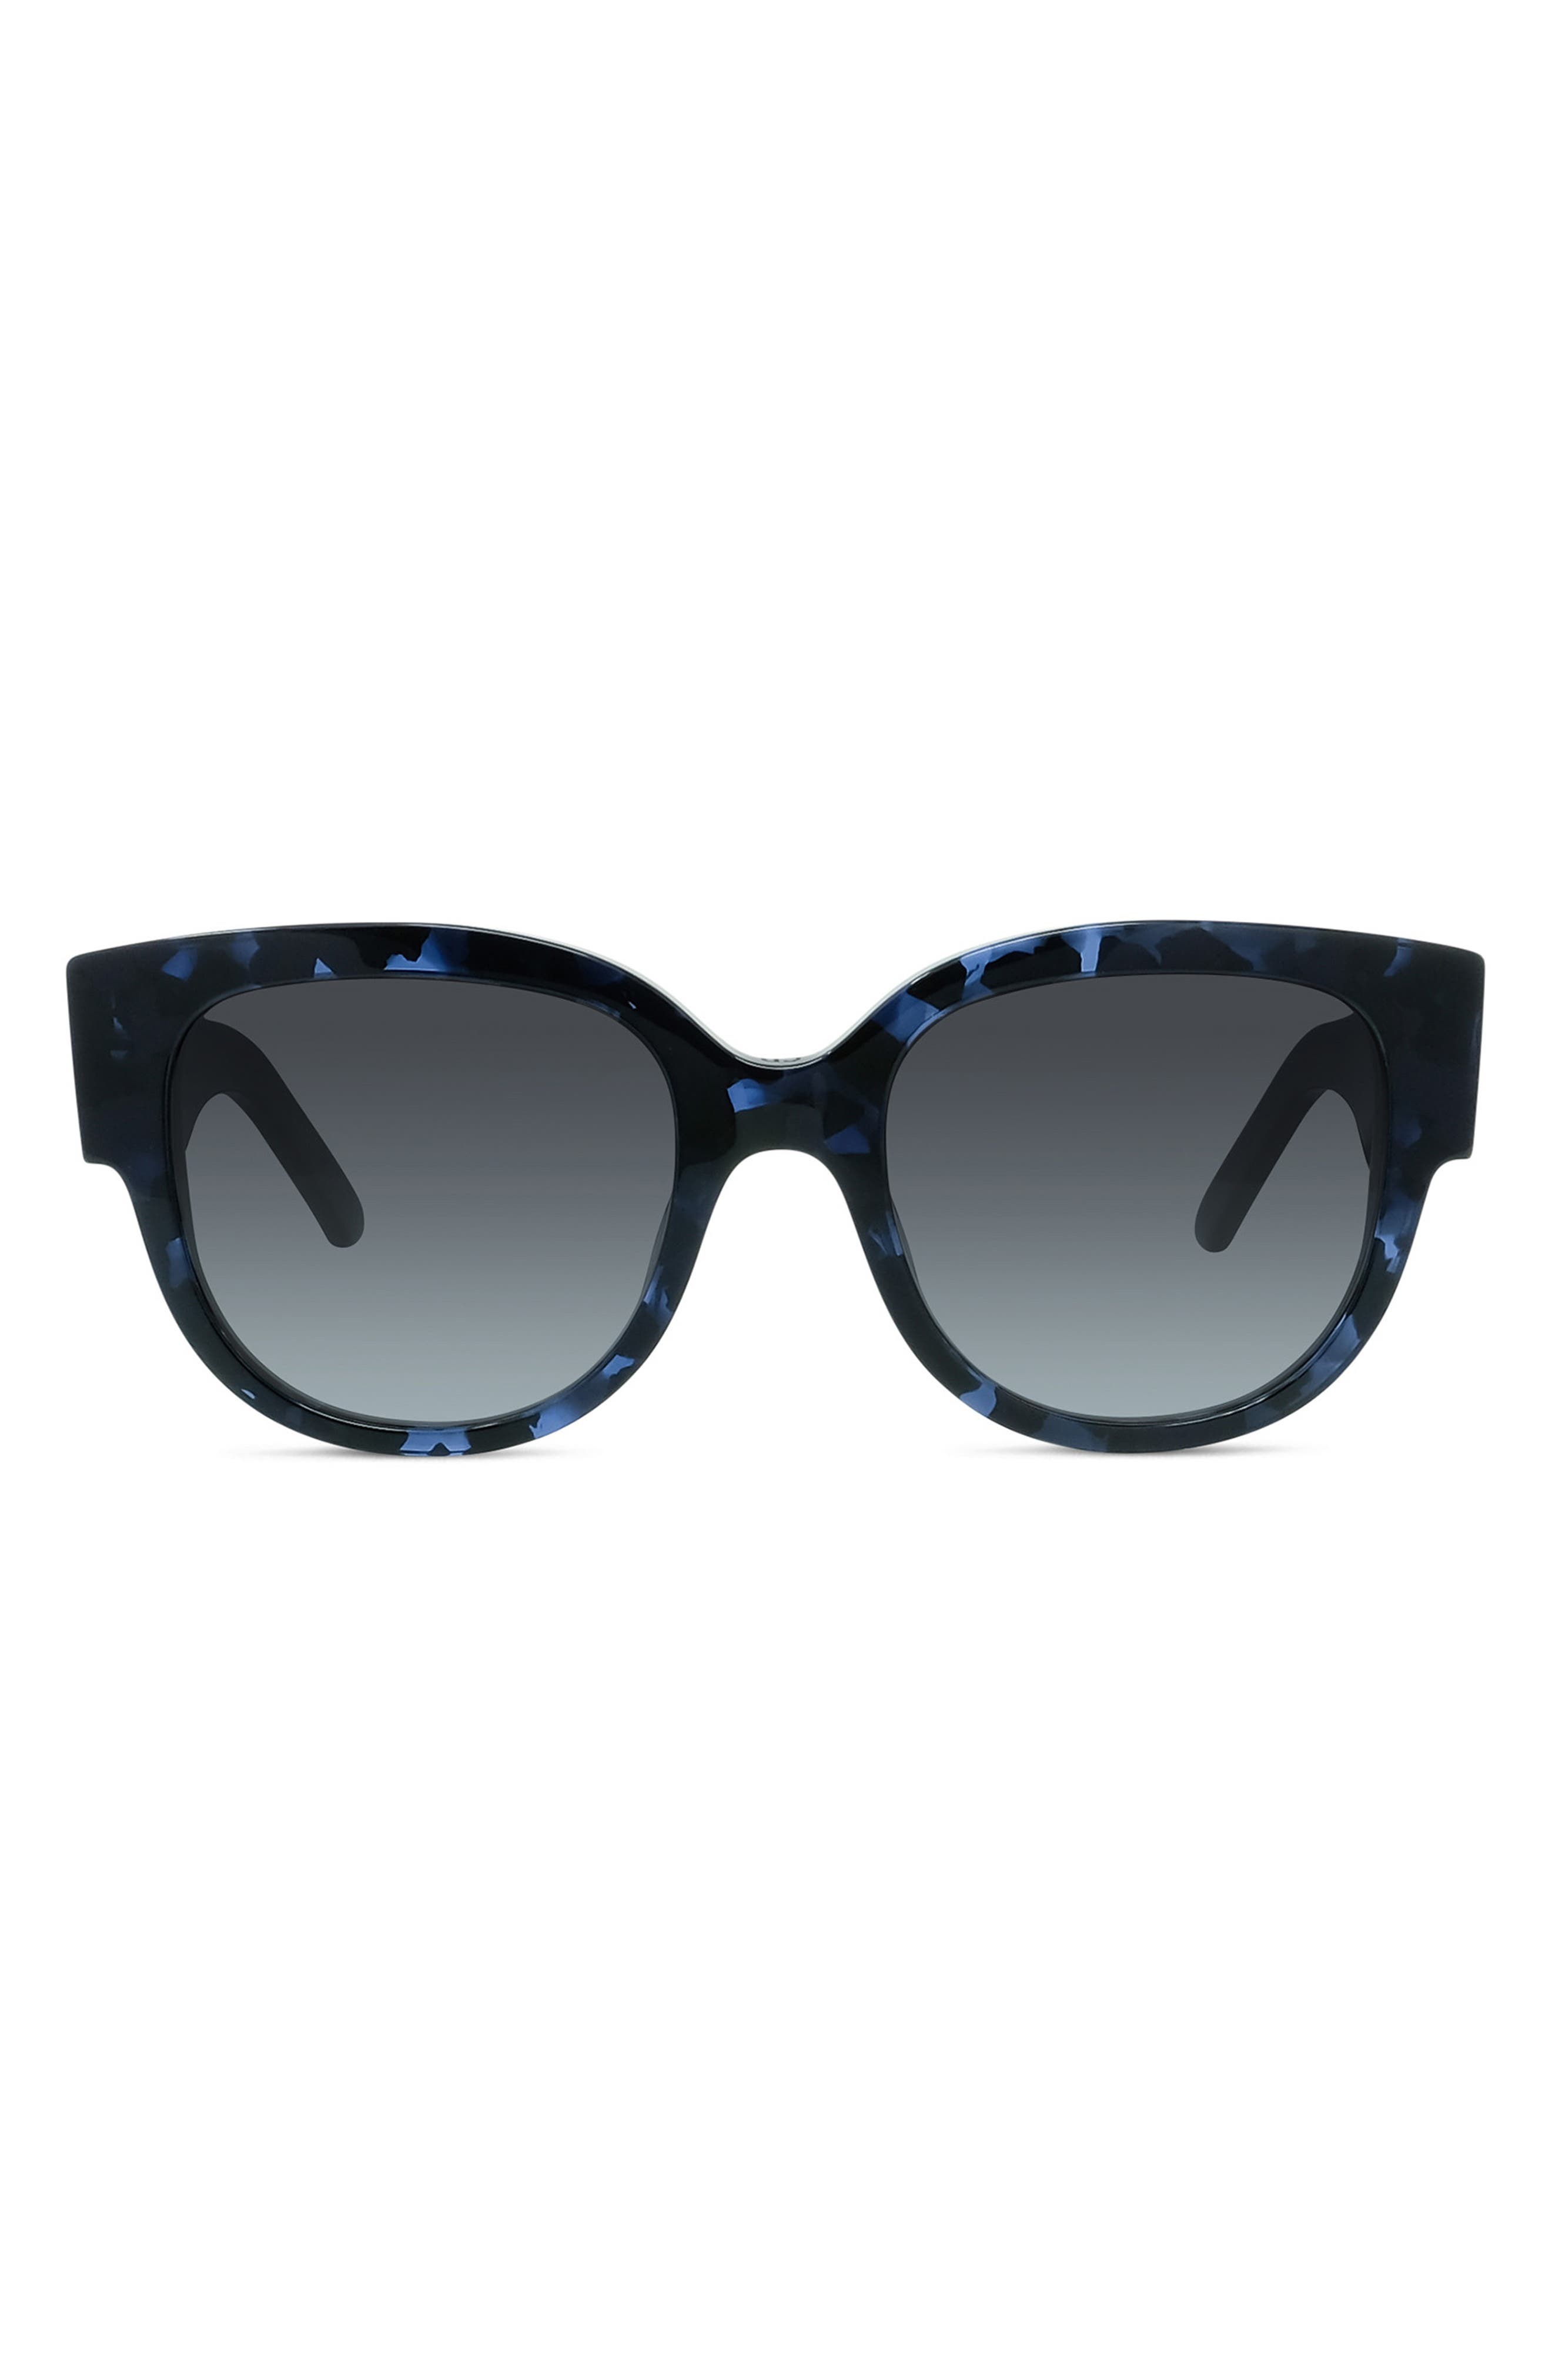 Christian Dior Christain Dior Wildior 54mm Round Sunglasses in Blue at Nordstrom